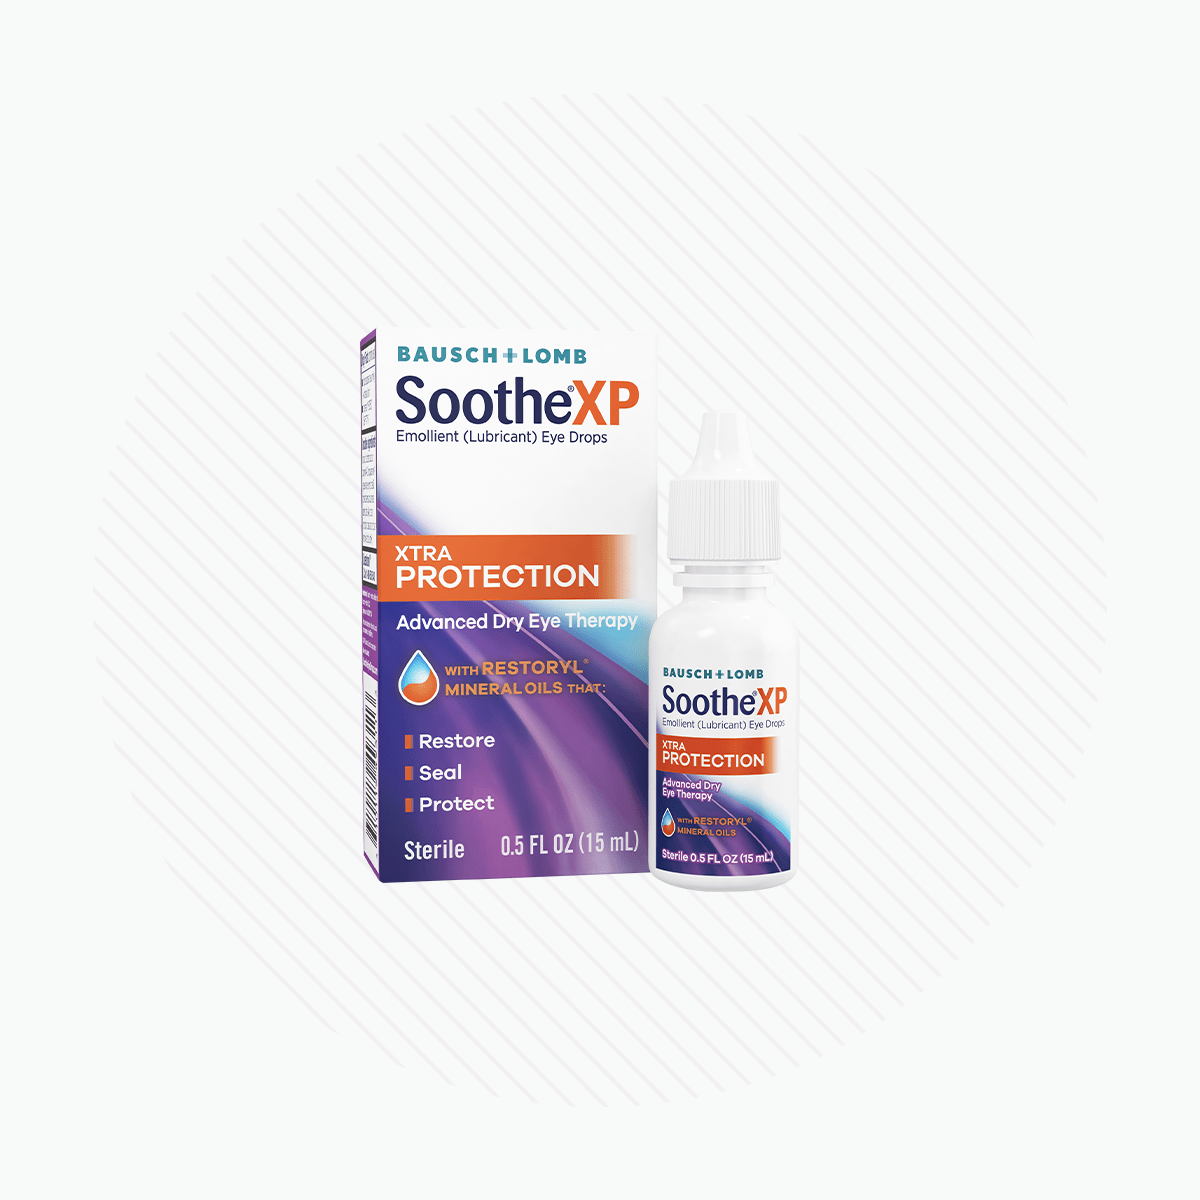 Soothe® XP-Xtra Protection Emollient (Lubricant) Eye Drops from Bausch +  Lomb